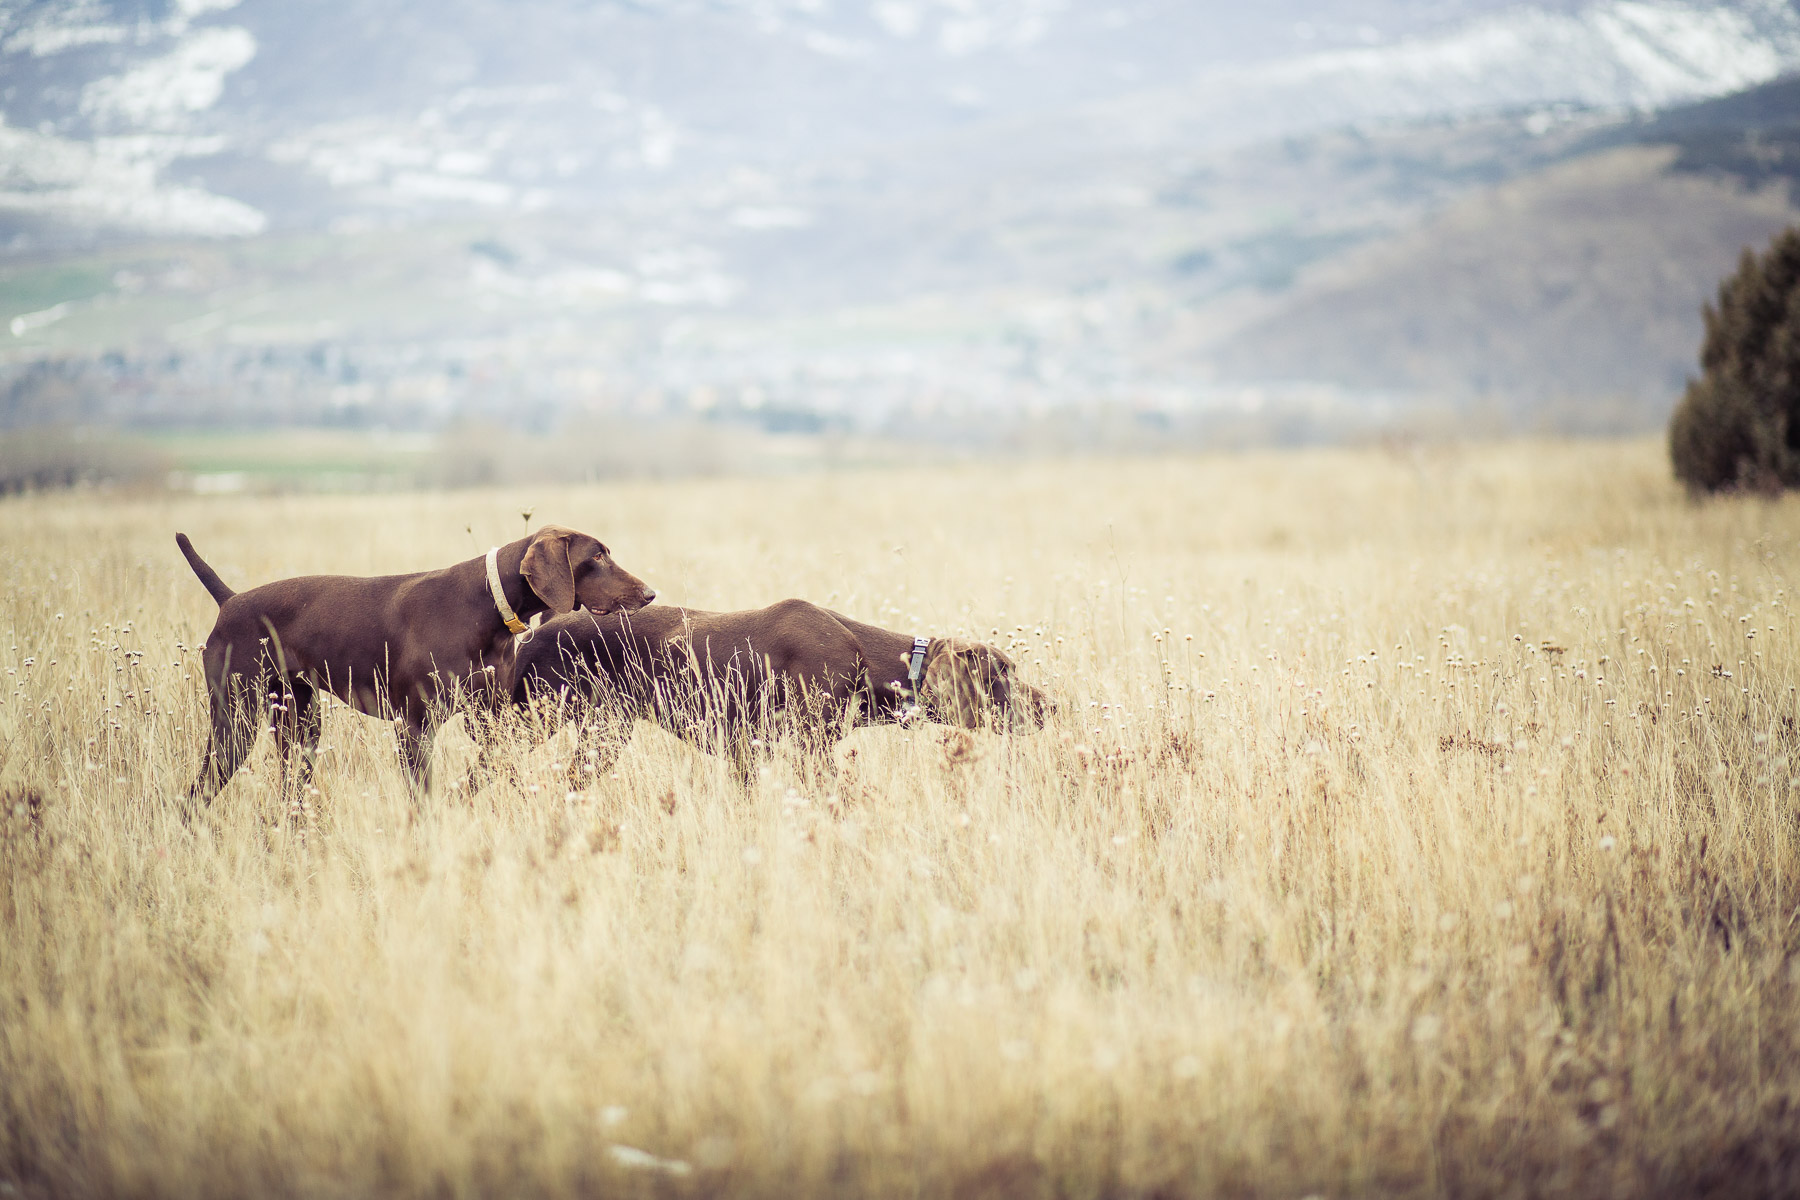 2dog-lifestyle-photographer-hunter-dogs-fetching-pheasants-nature-outdoors-bloodhounts-.jpg